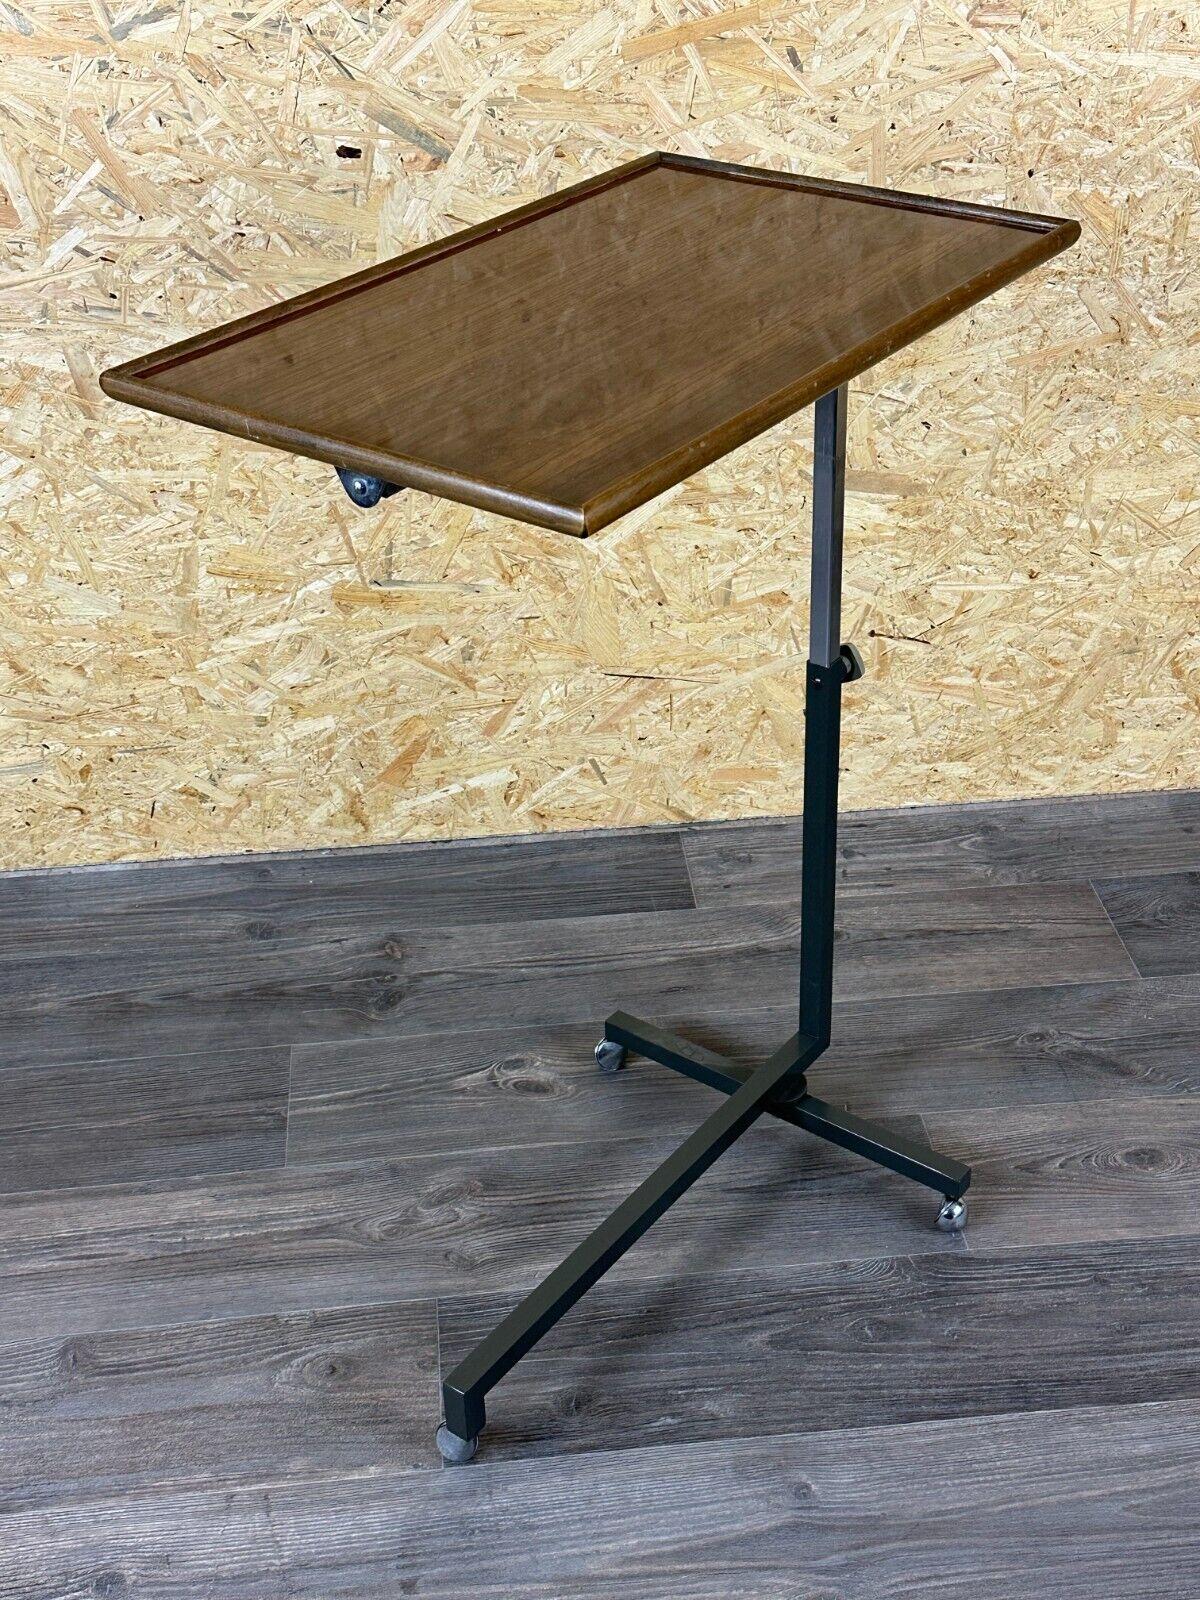 60s 70s serving trolley dinette side table space age brown design im Angebot 5